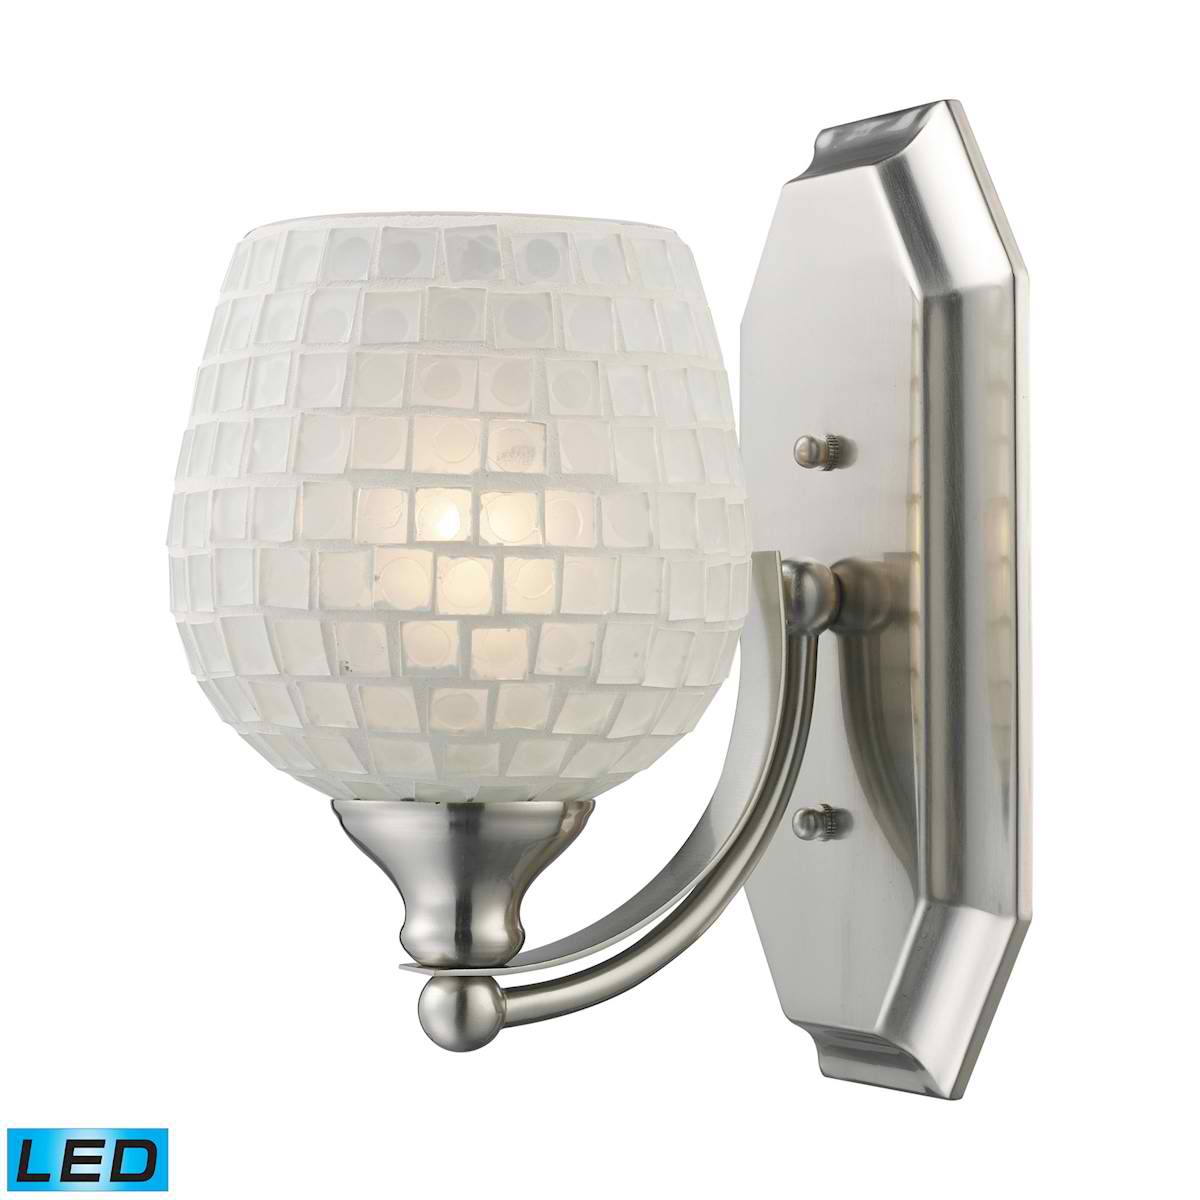 1 Light Vanity in Satin Nickel and White Mosaic Glass - LED Offering Up To 800 Lumens (60 Watt Equivalent)